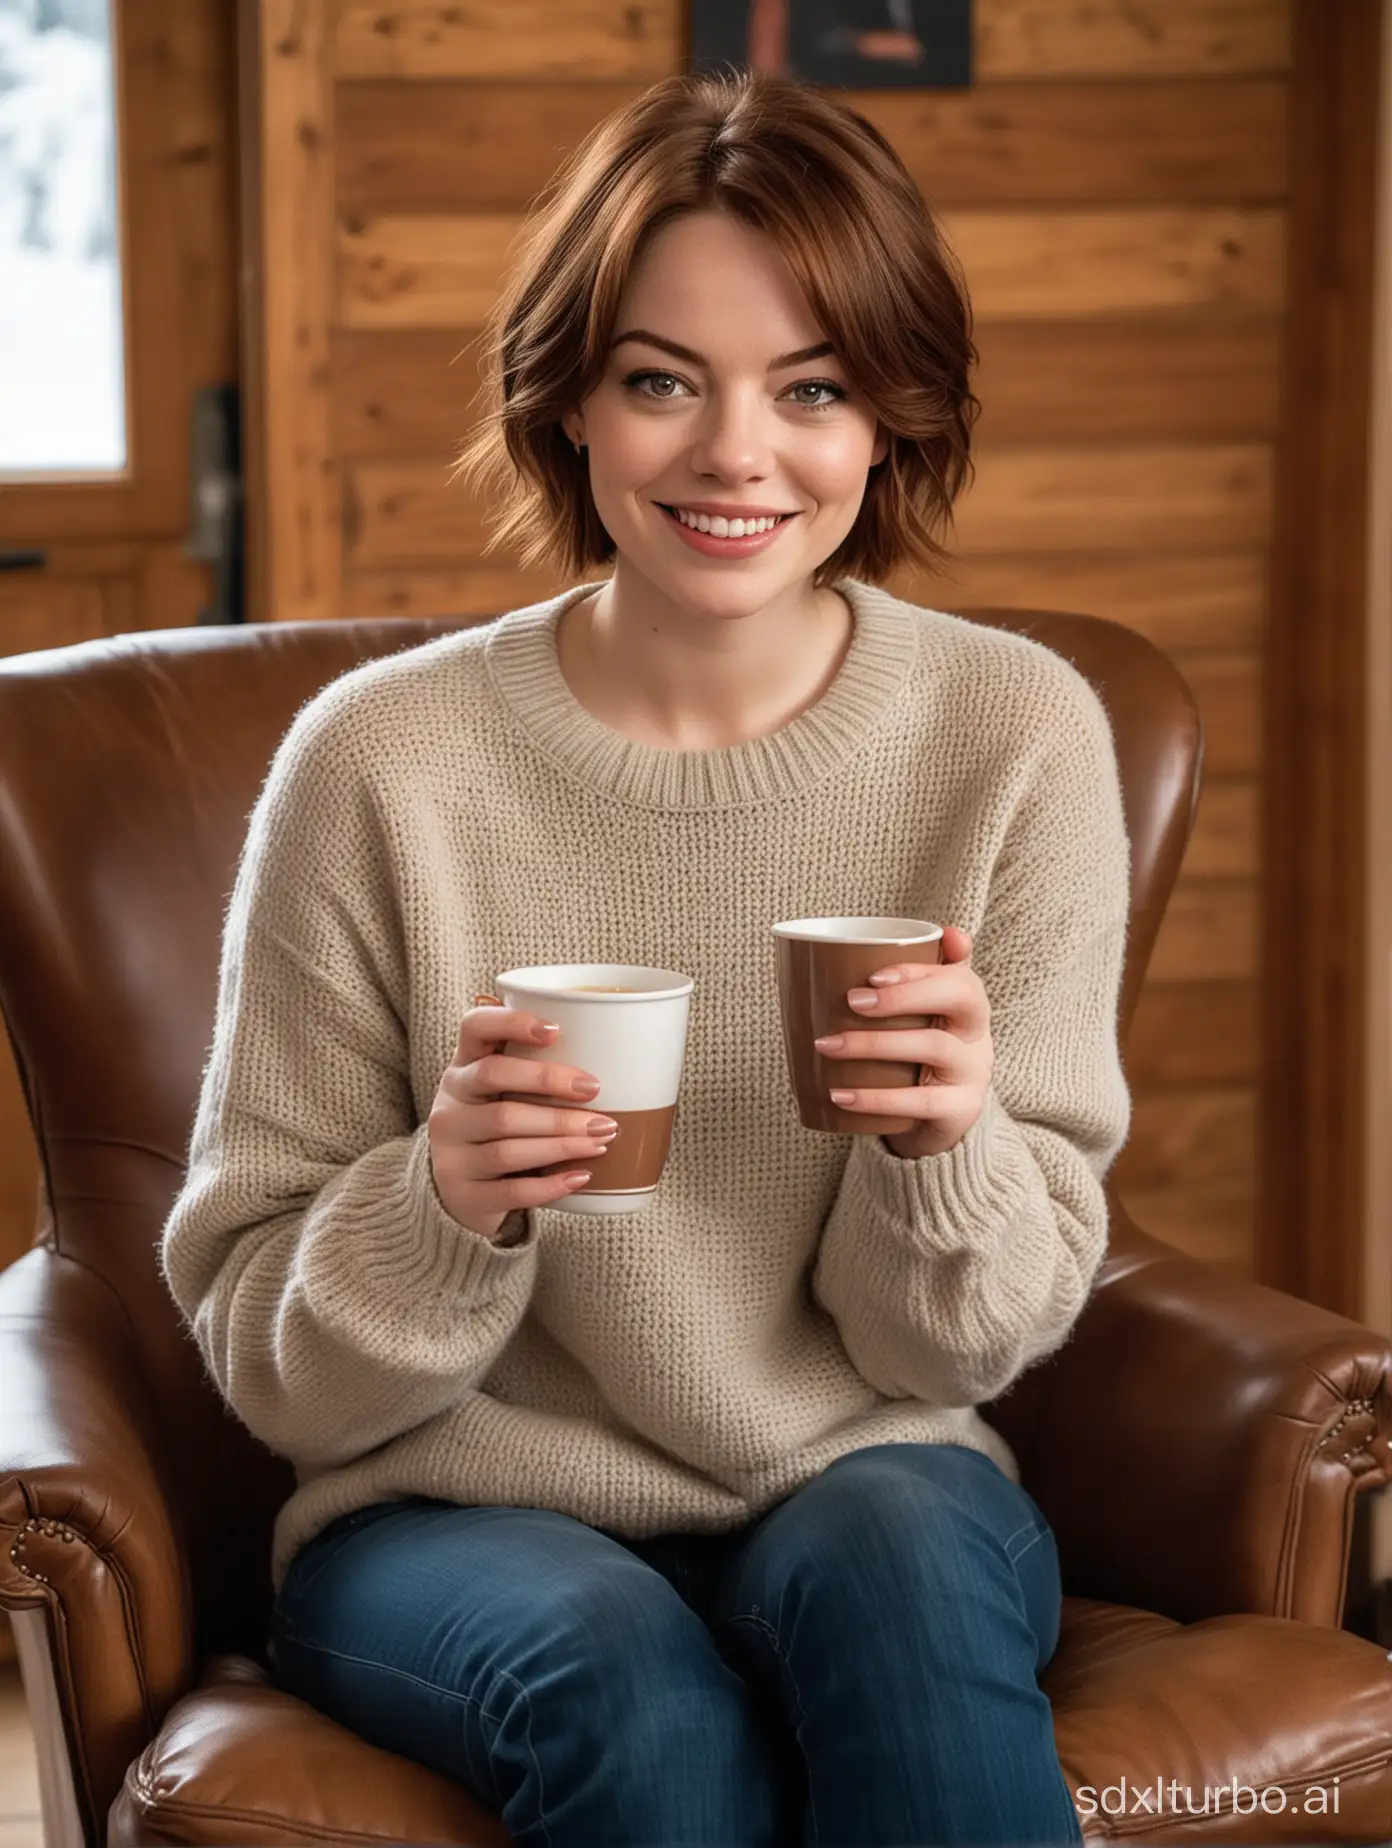 1 woman, like Emma Stone, huge breast, short hair, at a ski chalet, holding a cup of hot chocolate, smile, sitting in a leather chair, sweater, jeans